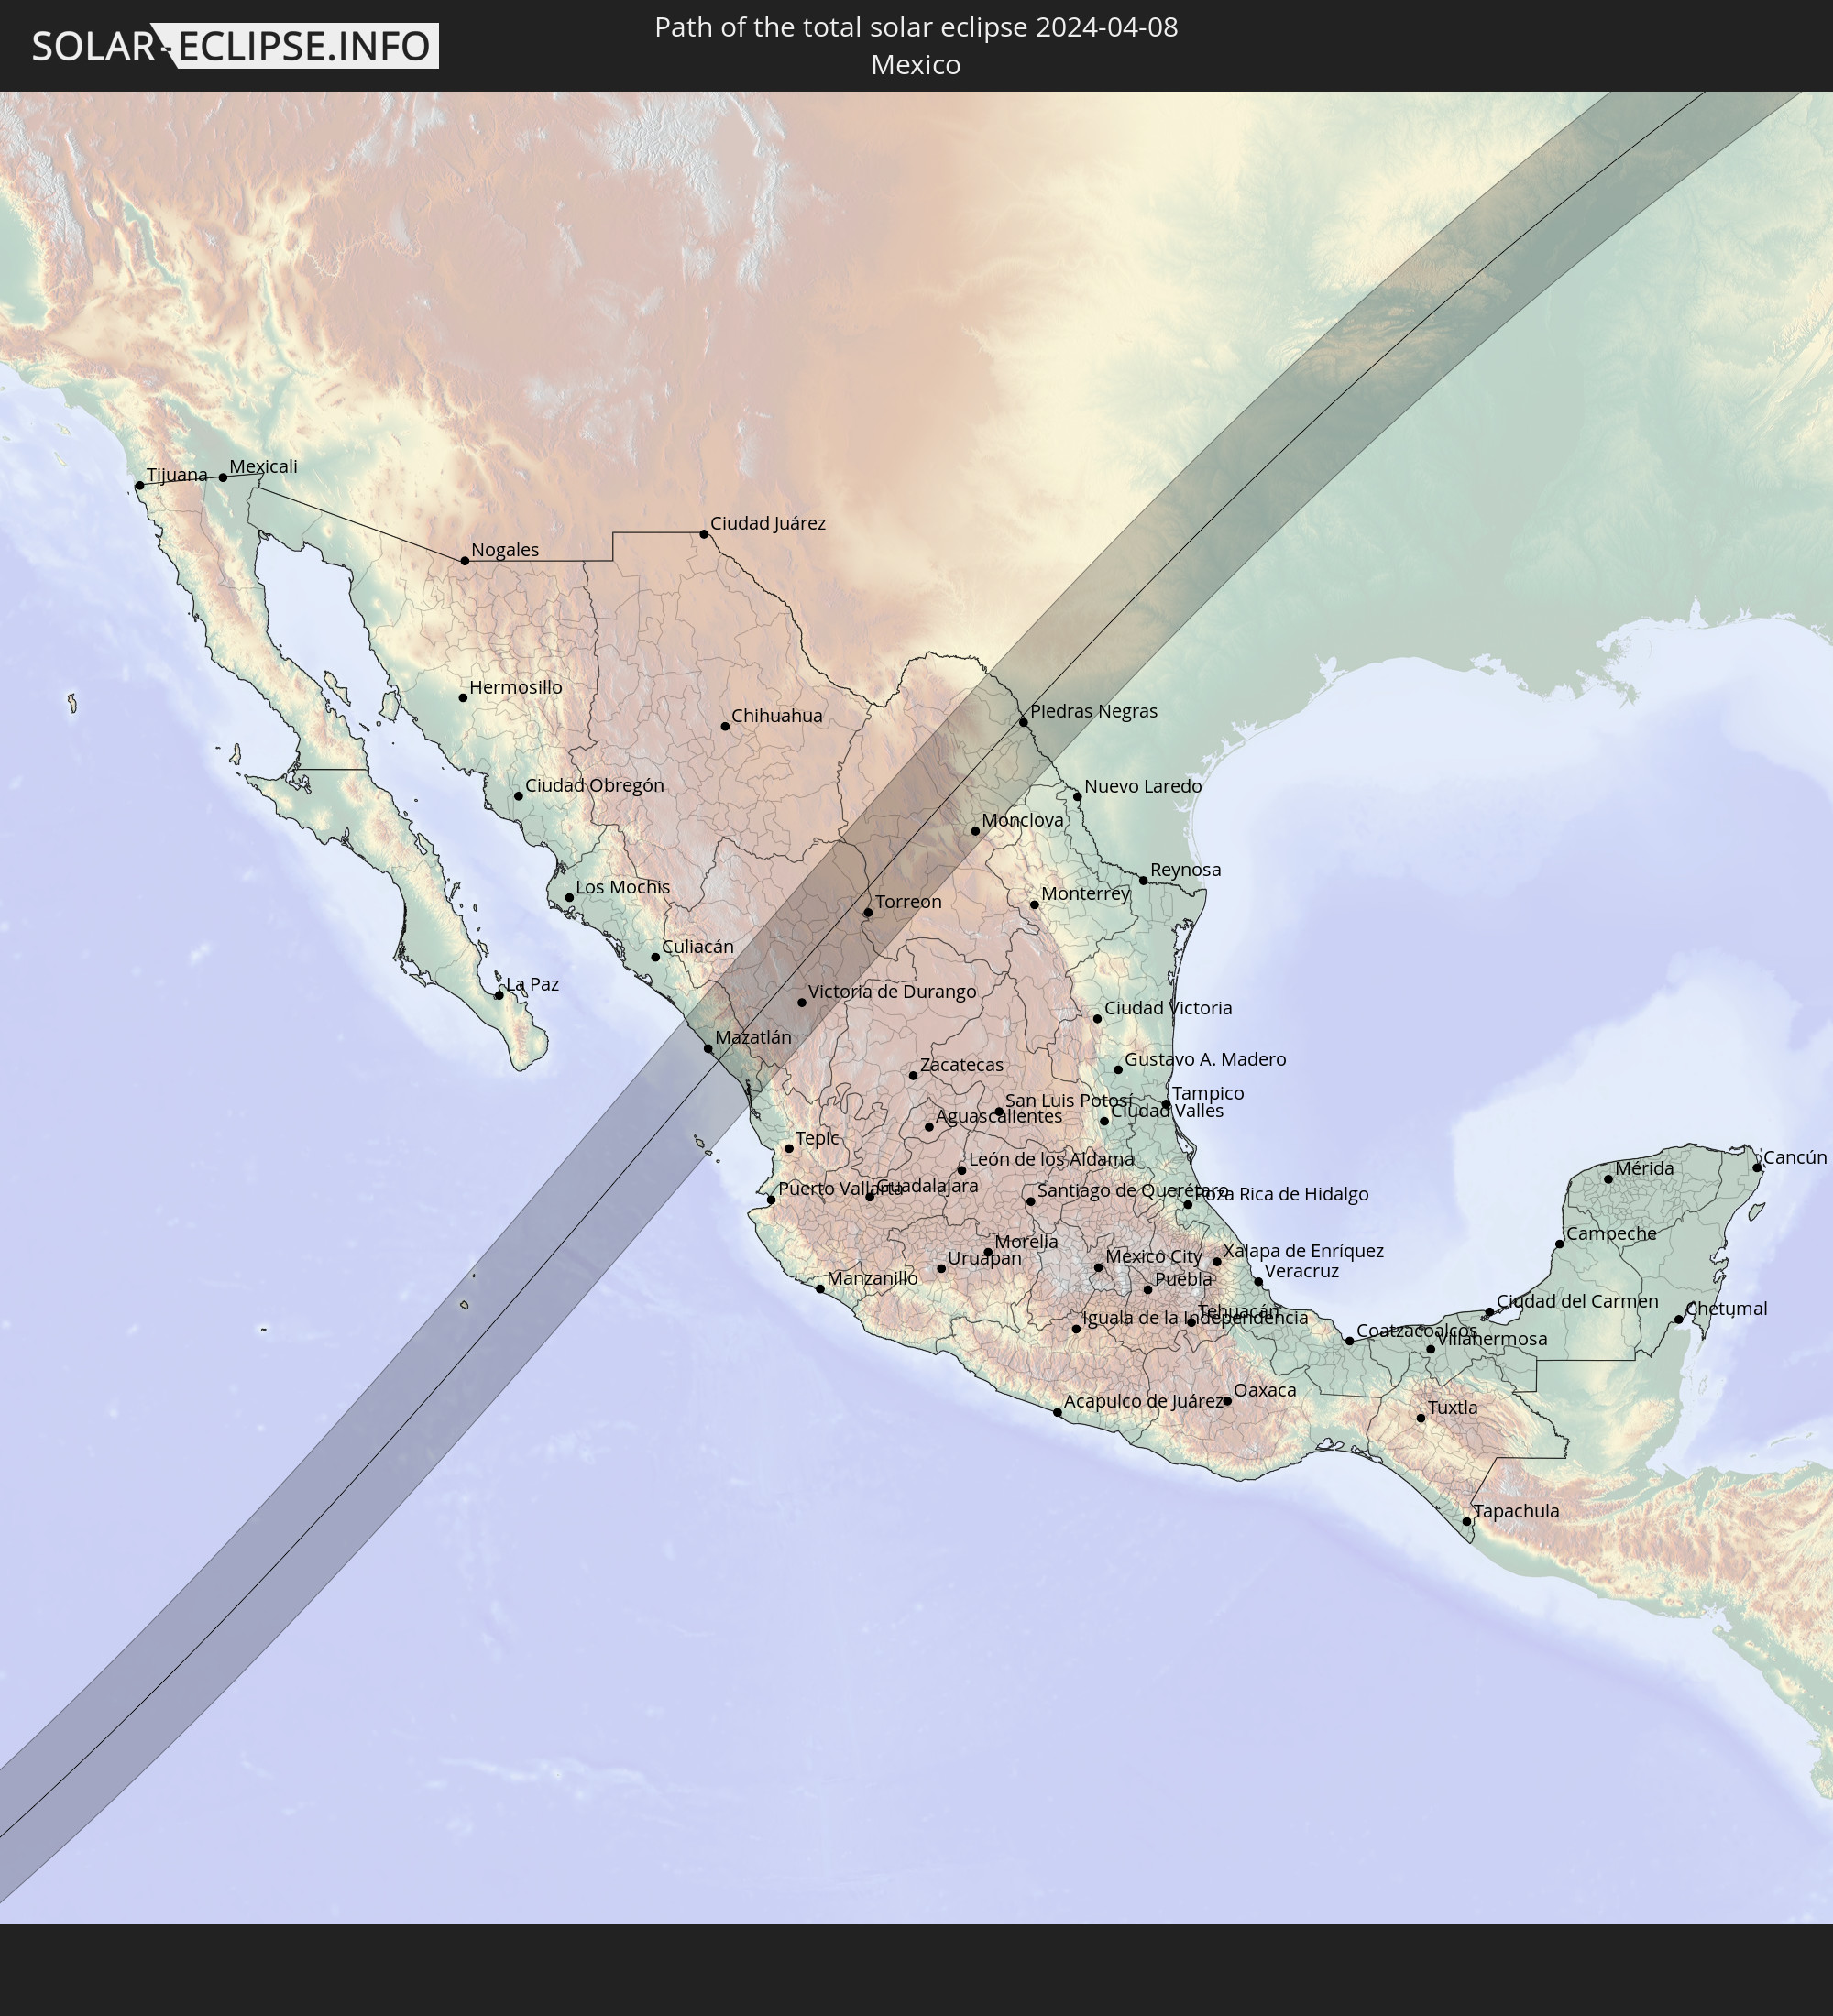 Eclipse 2024 Map Mexico - Tera Abagail